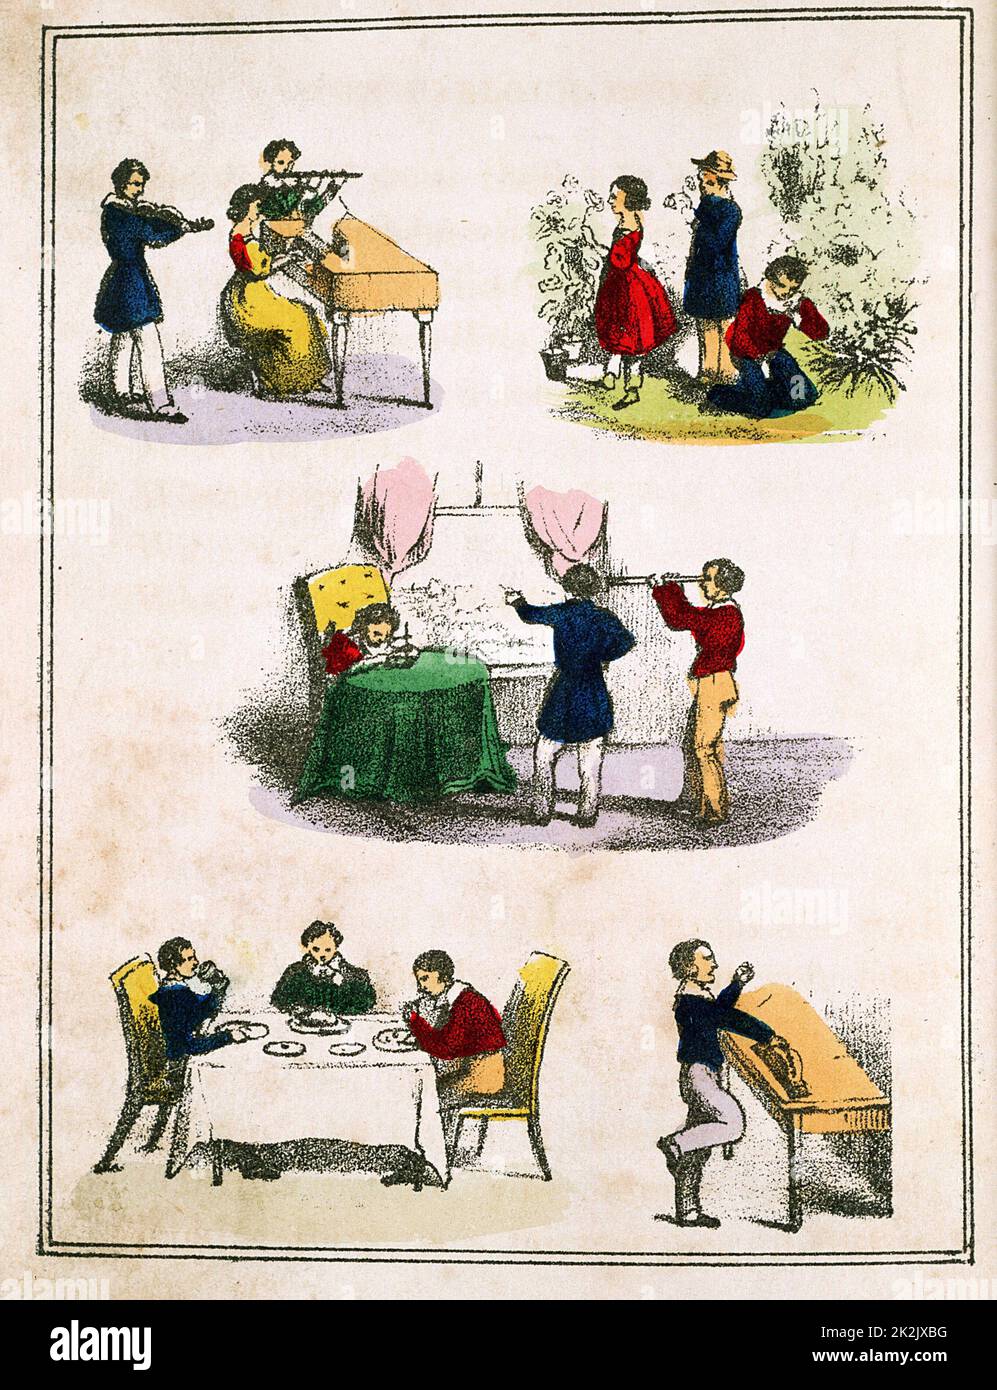 The Five Senses: smell, hearing, sight, touch and taste. From children's book, London c1850. Lithograph Stock Photo